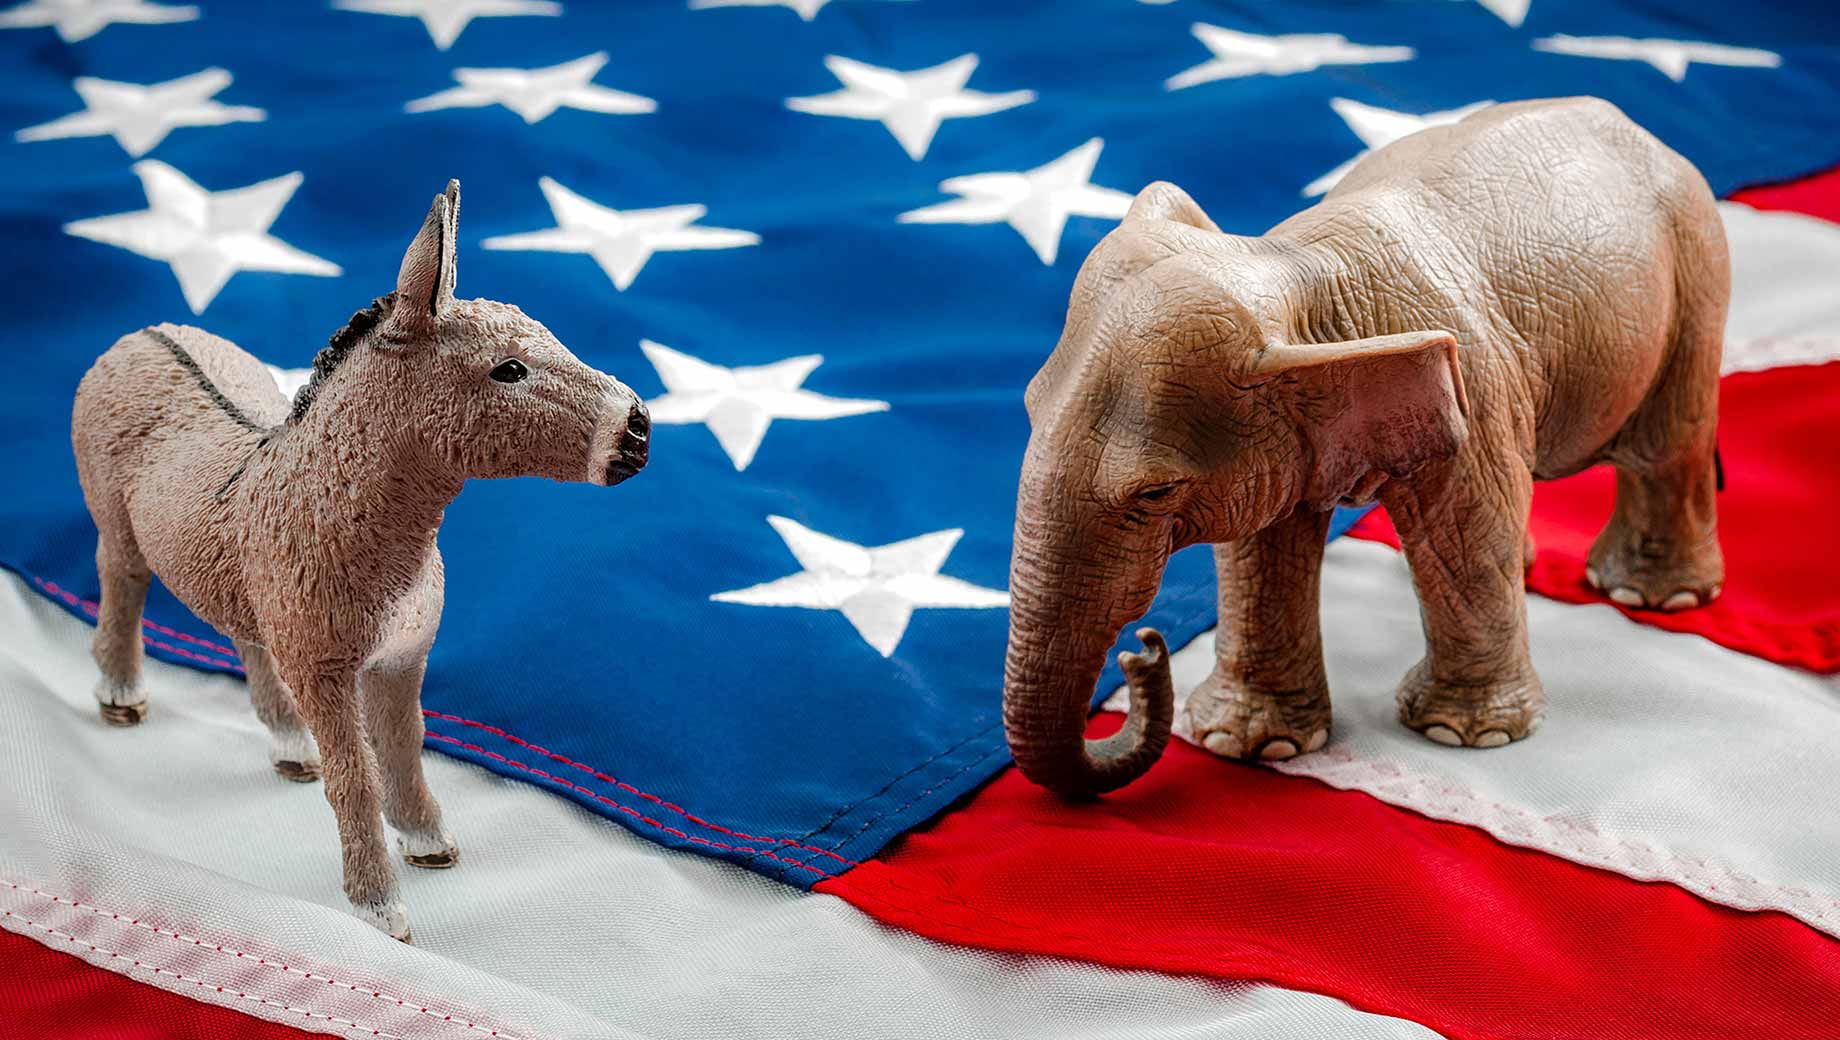 Democrats Viewed as Party Better Able to Handle Top Problem